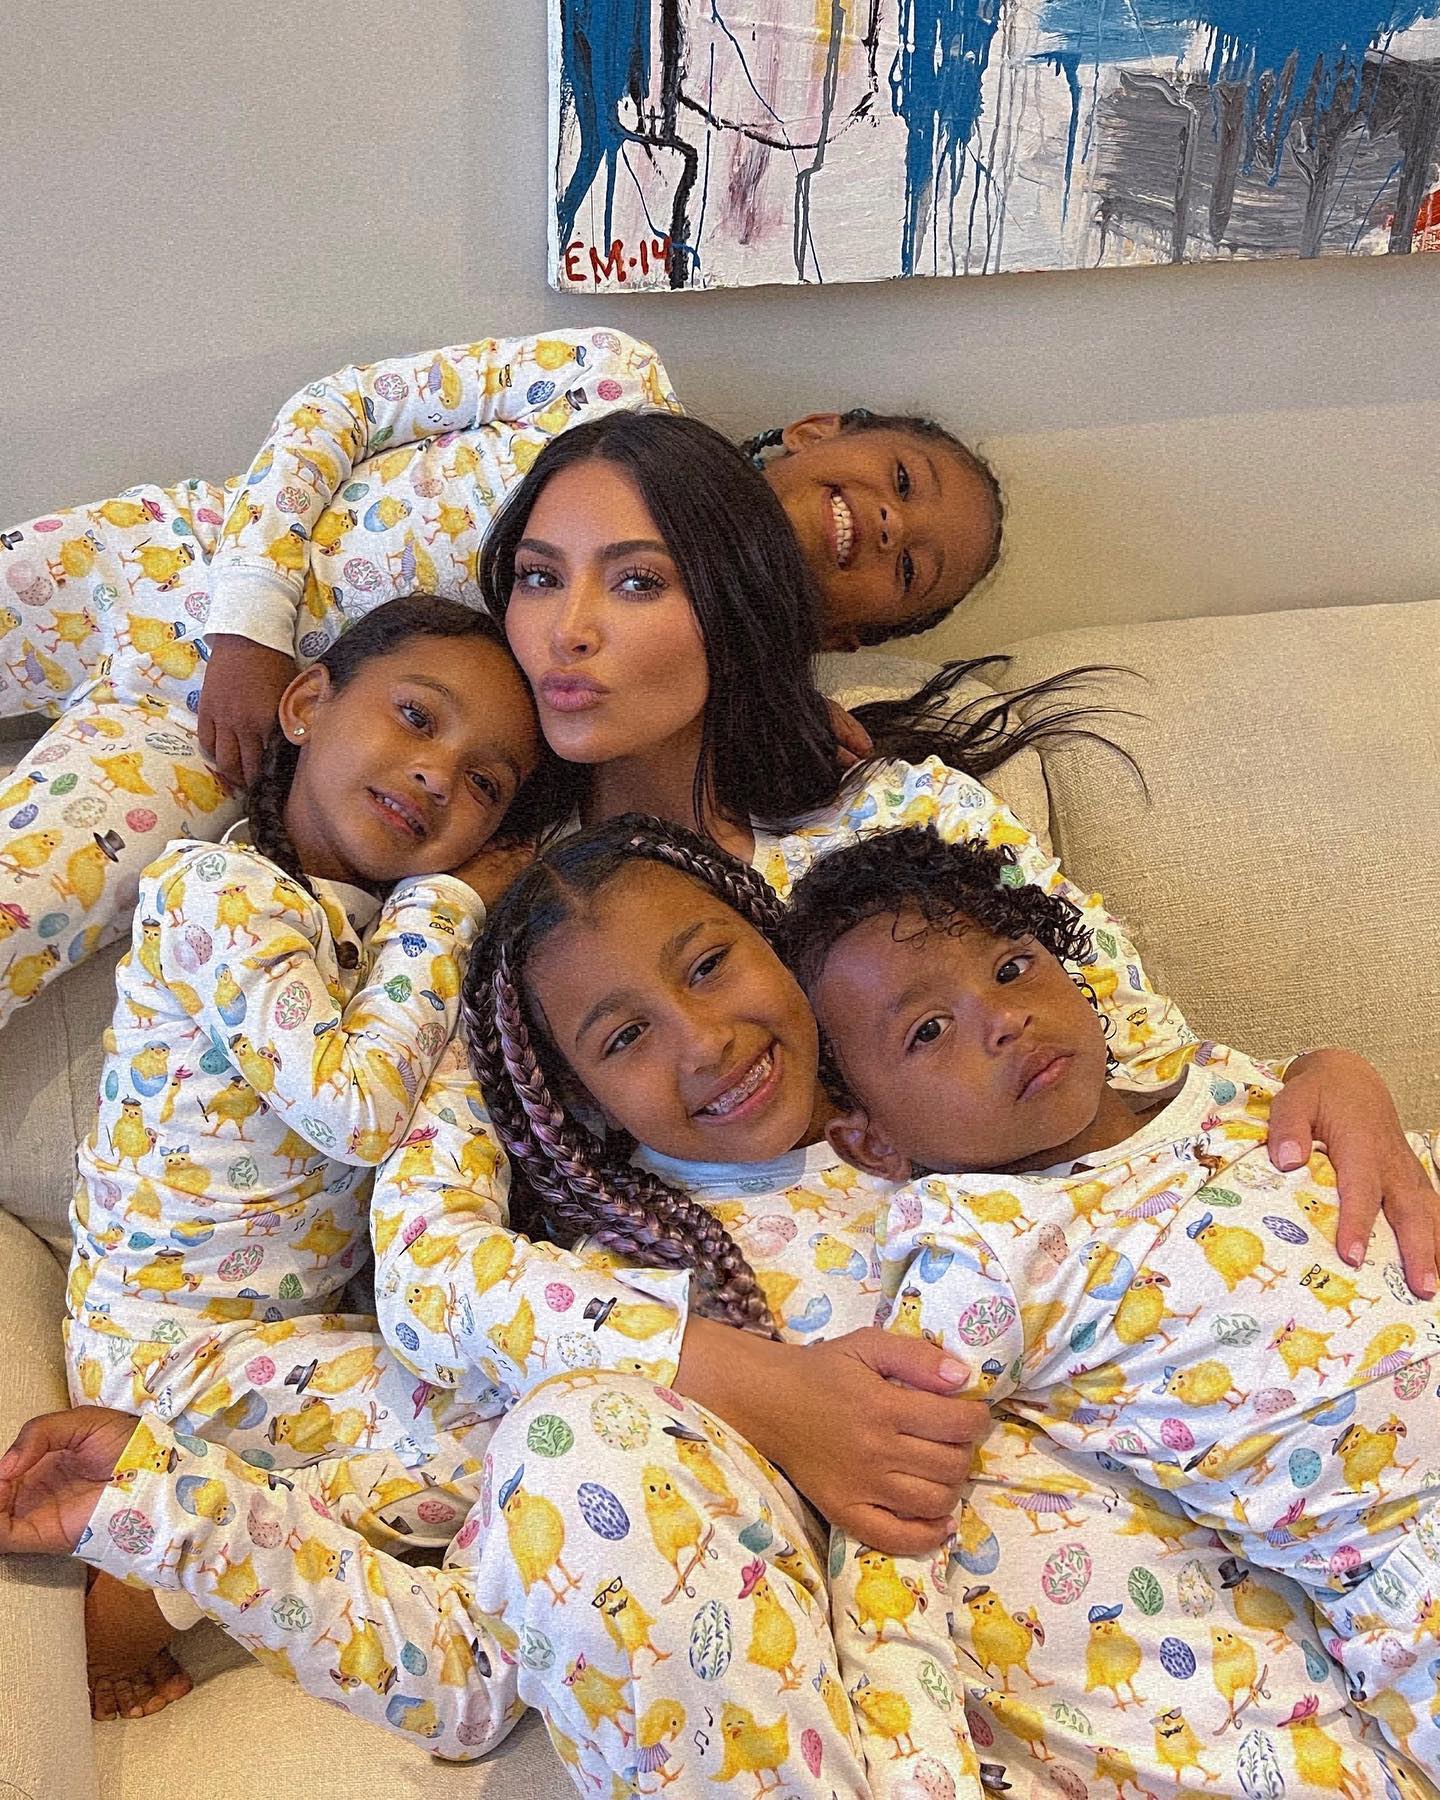 Reportedly, Kim is too tied up in being a mom of four